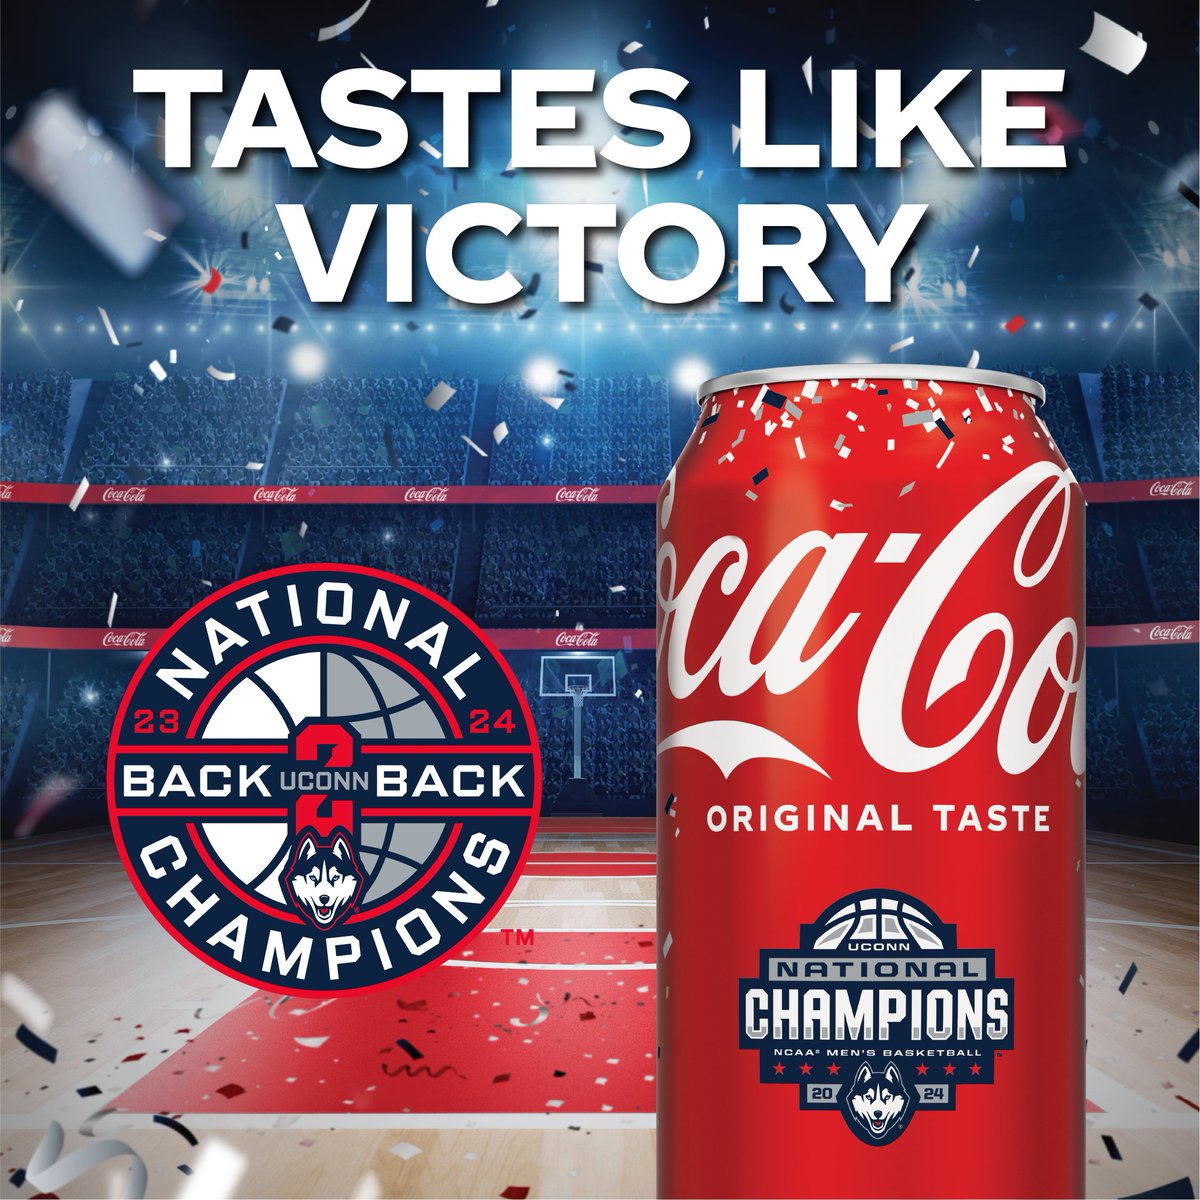 Congratulations to @UConnMBB on the back to back NCAA Men’s National Championship wins! Coca-Cola is proud to be a partner of the UConn Huskies.